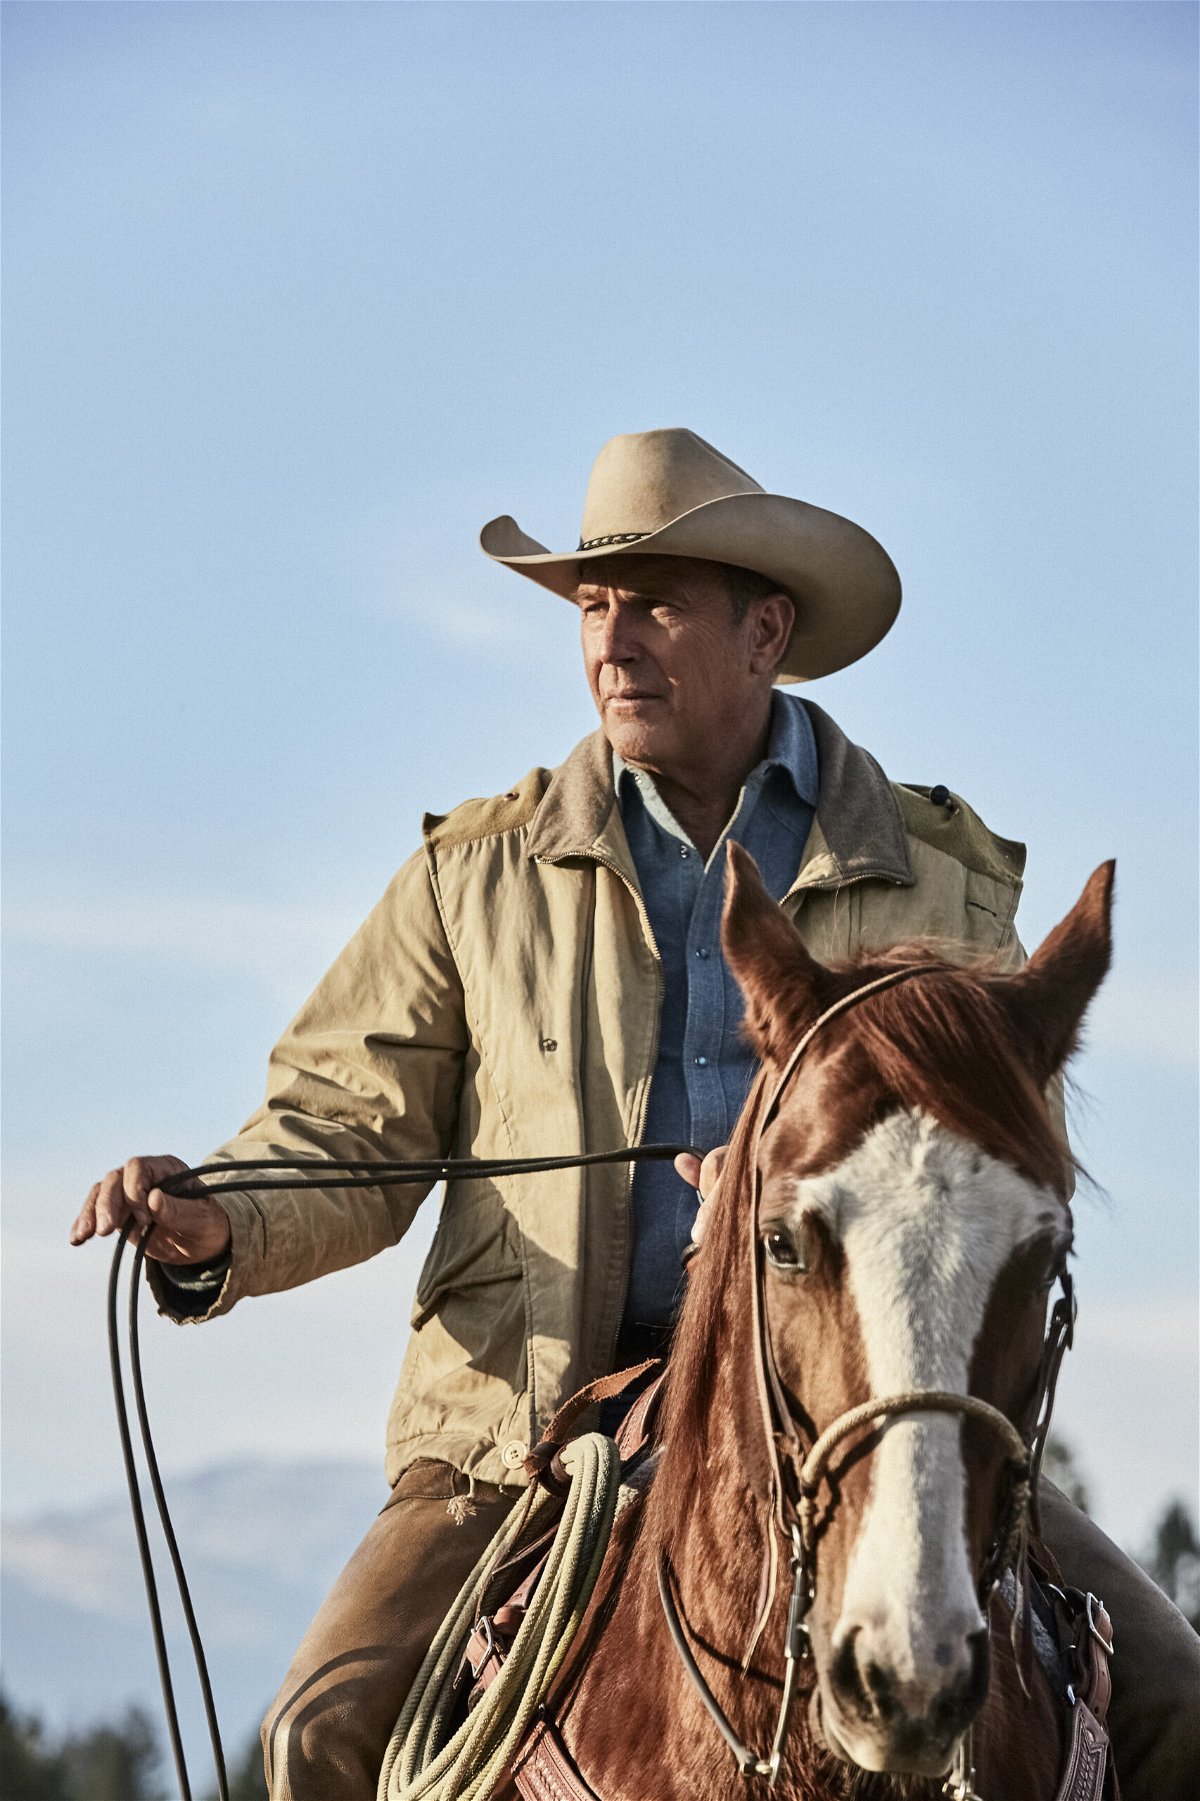 <i>KEVIN LYNCH FOR PARAMOUNT NETWORK</i><br/>Kevin Costner in 'Yellowstone'